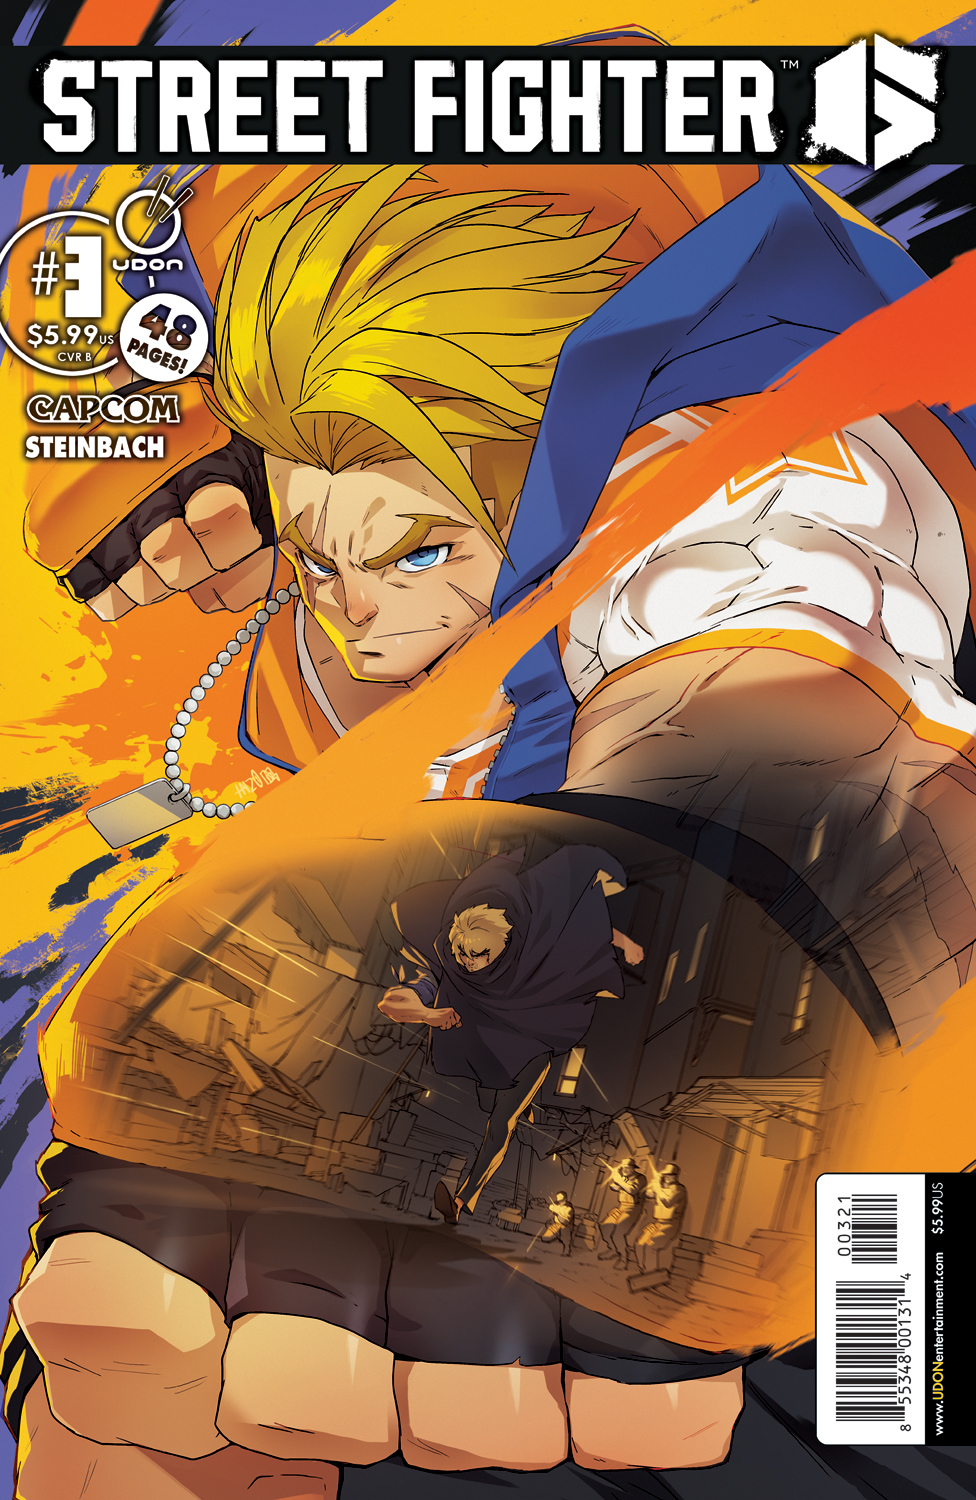 Street Fighter 6 #3 Cover B Steinbach (Of 4)